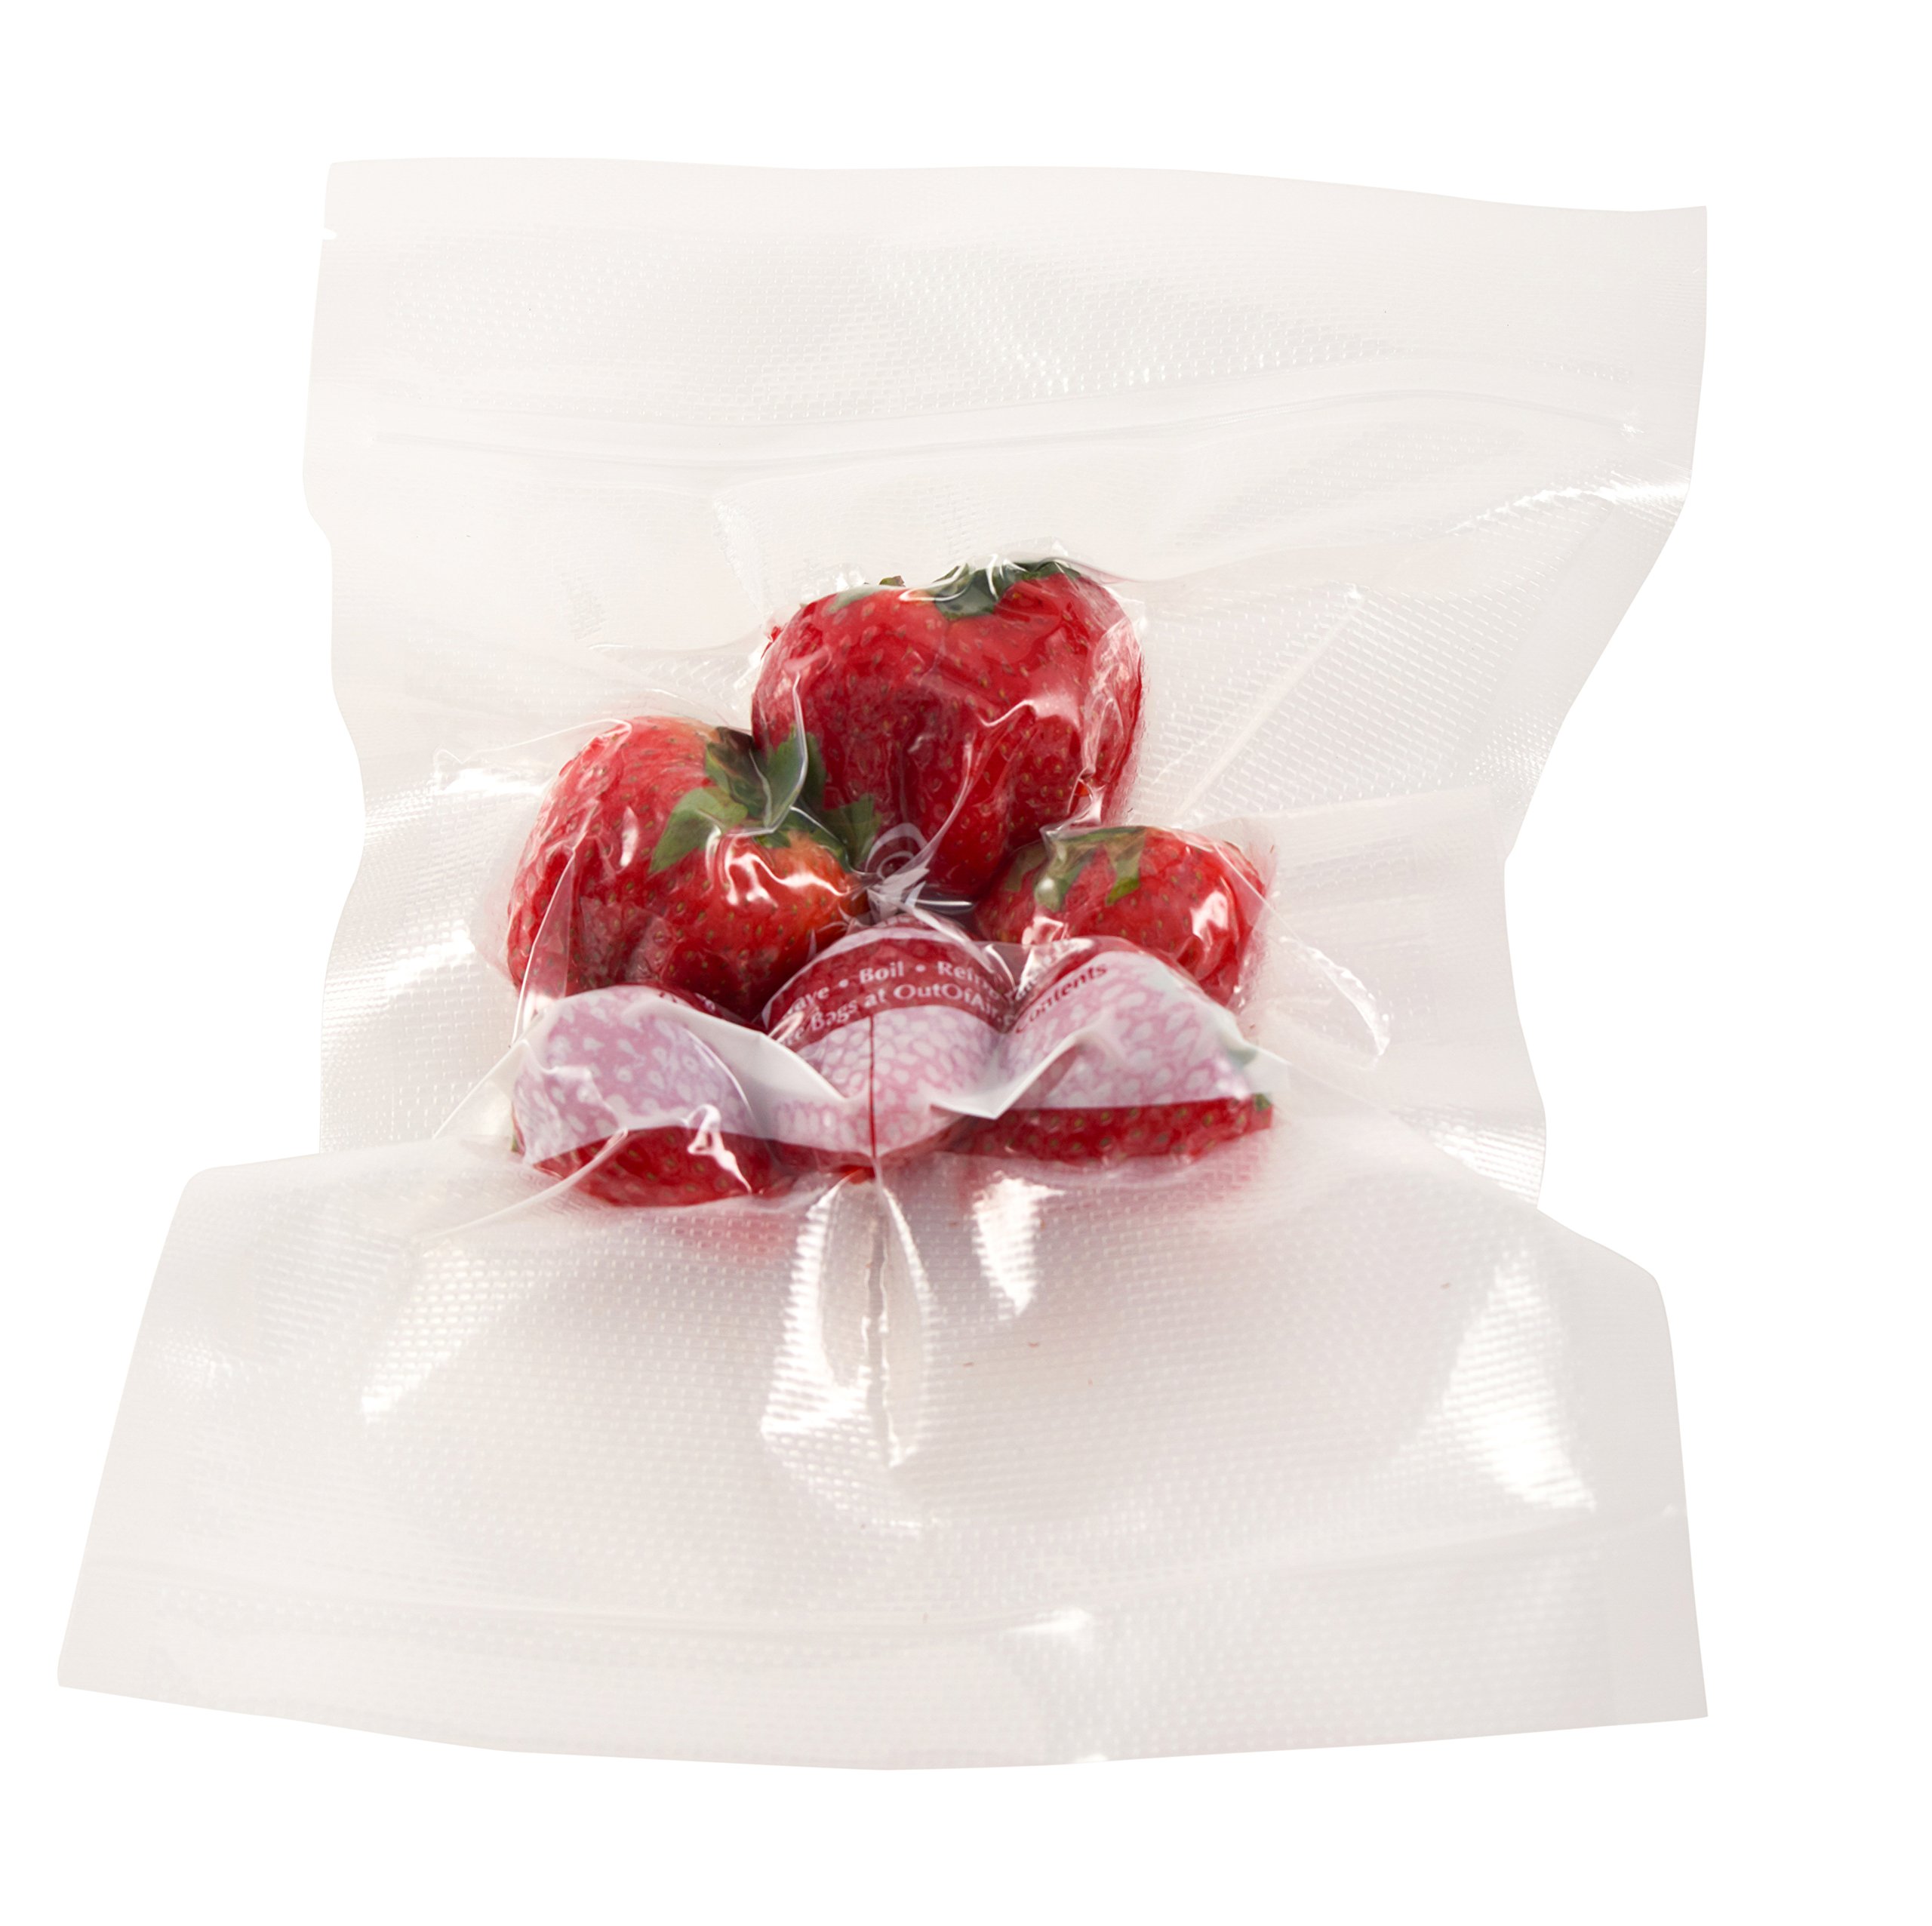 100 Vacuum Sealer Bags: Pint Size (6 x 10) for Foodsaver 33% Thicker, BPA Free